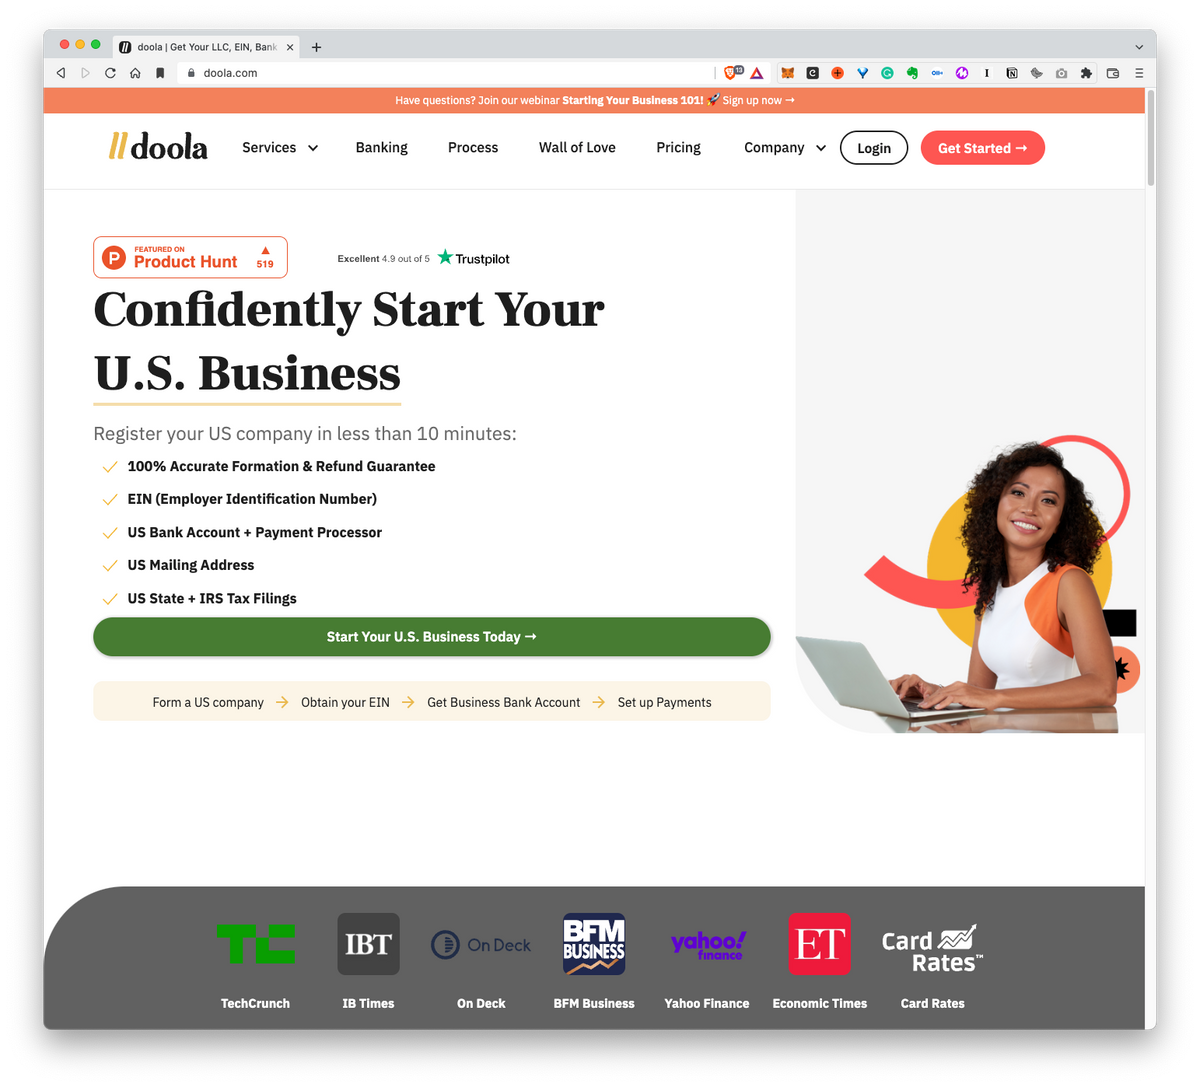 Doola: Confidently Start Your U.S. Business. Register your US company in less than 10 minutes.